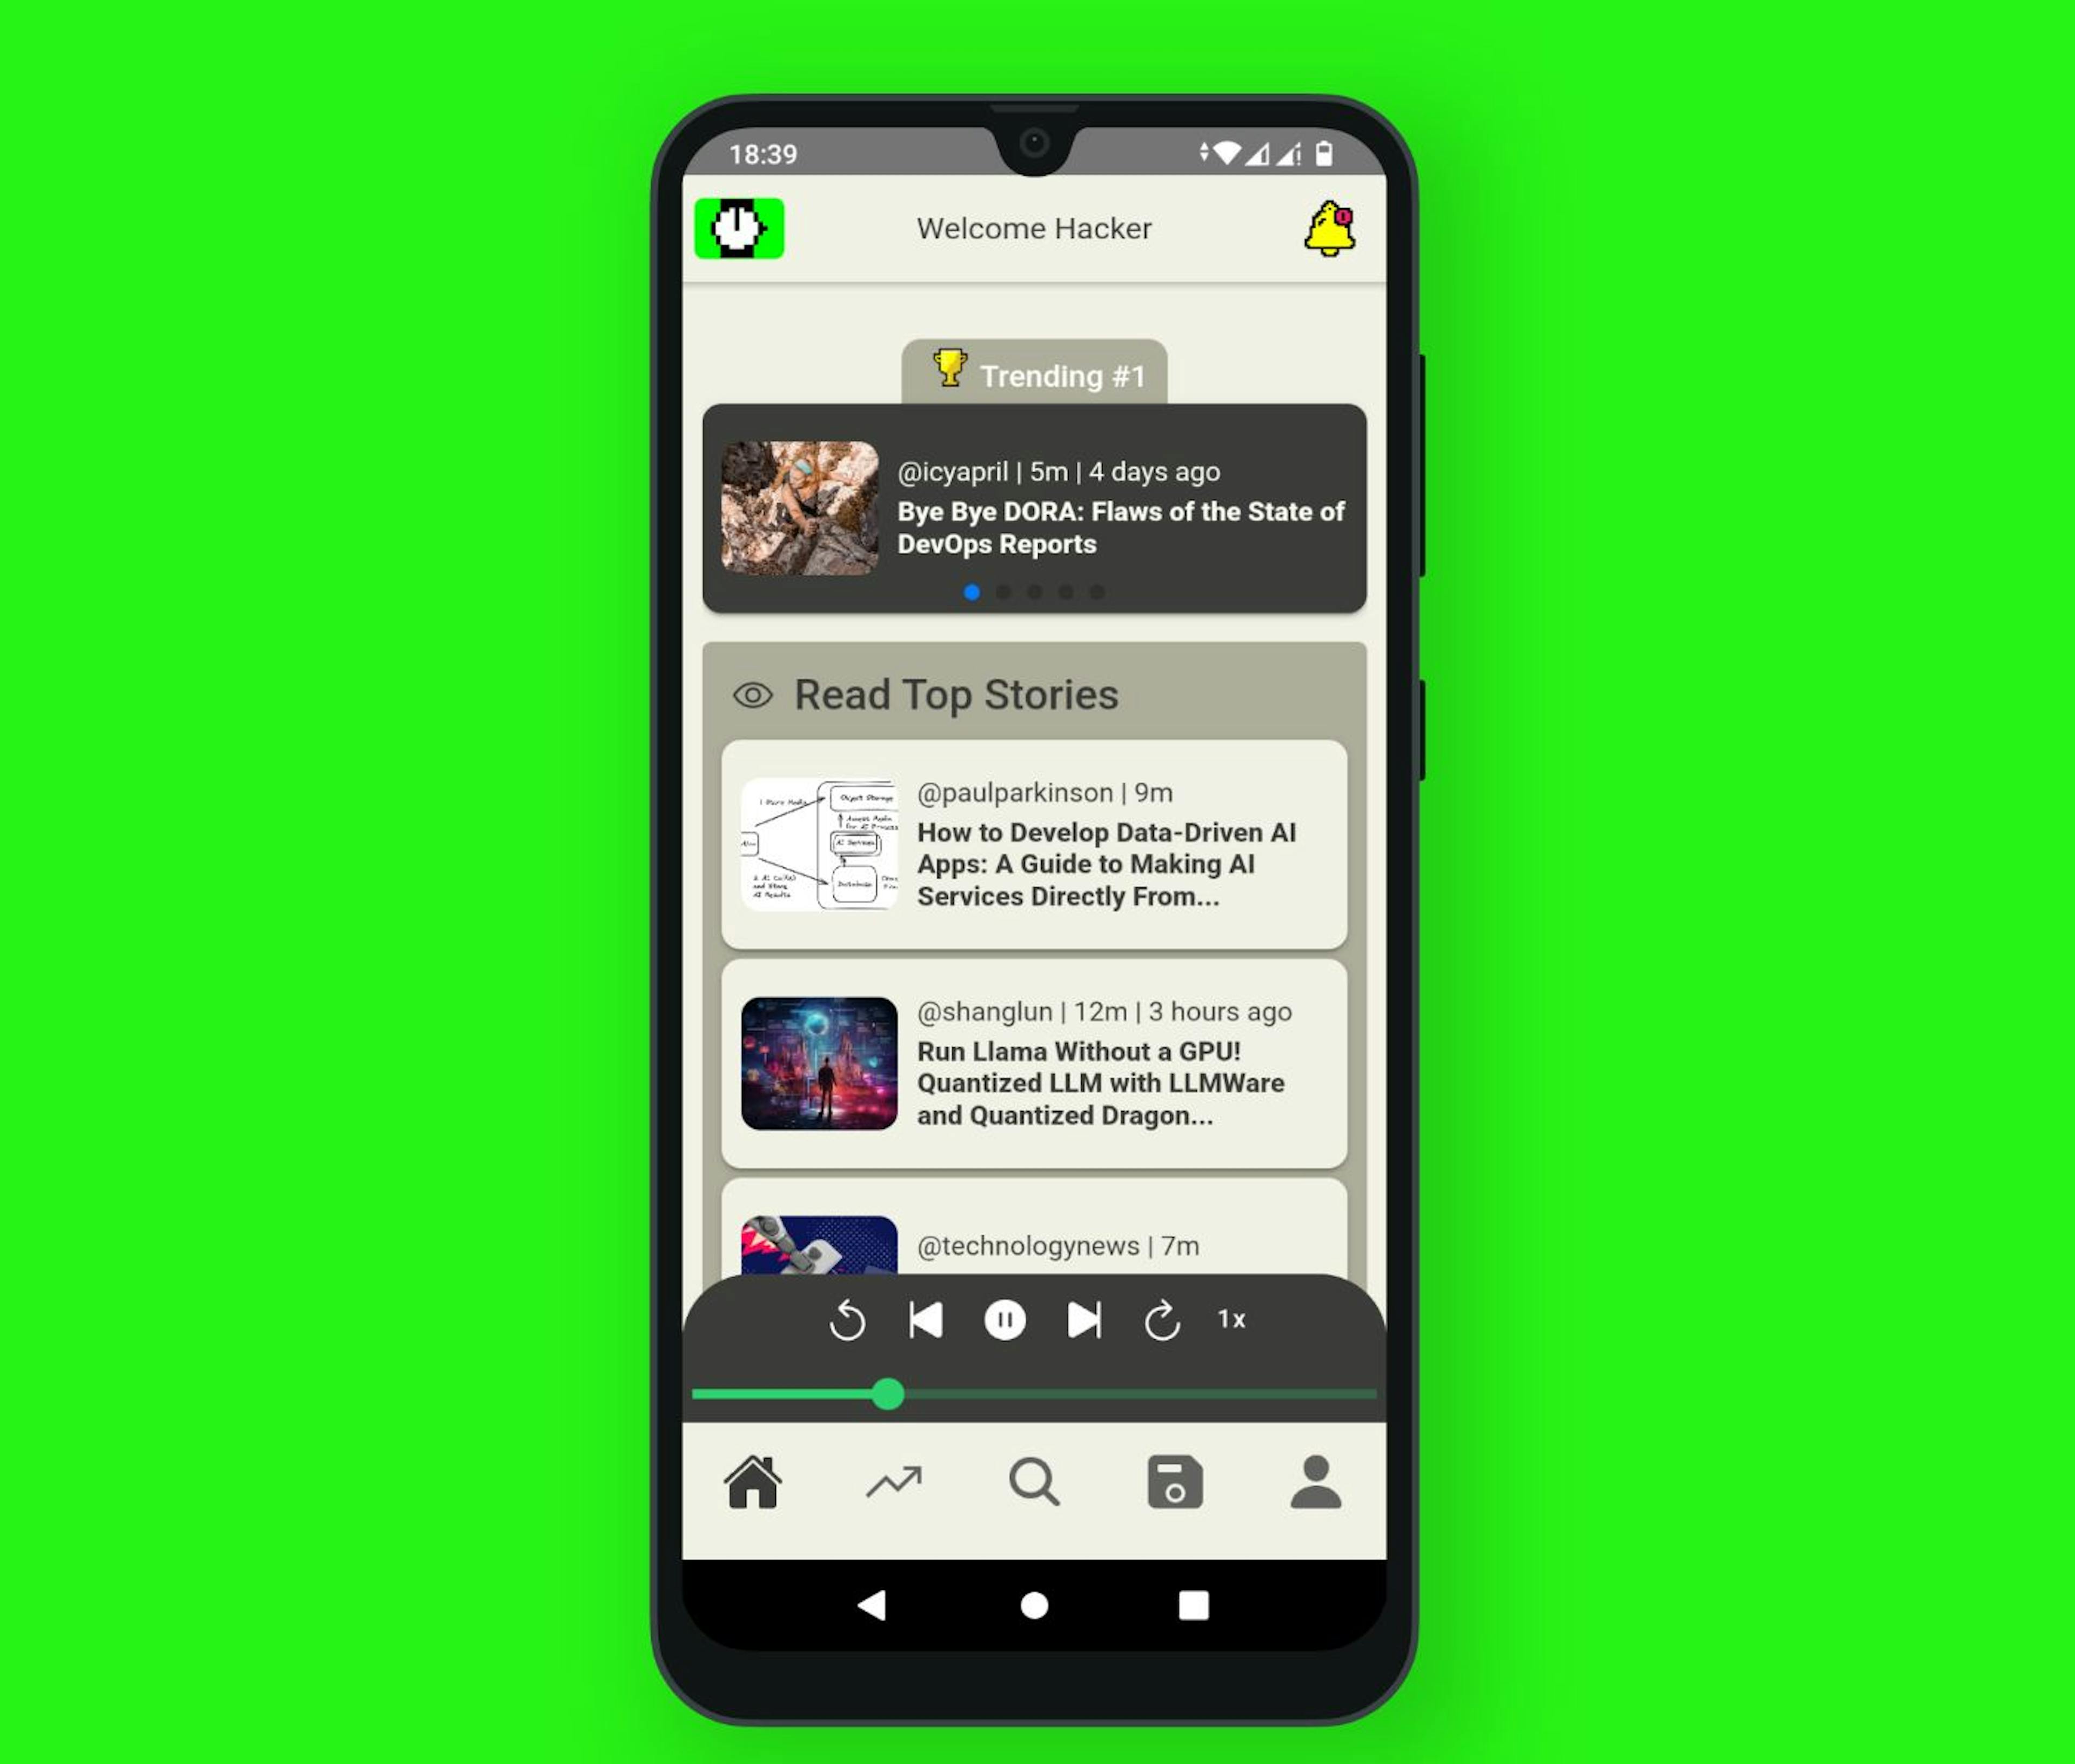 The HackerNoon App Home Page